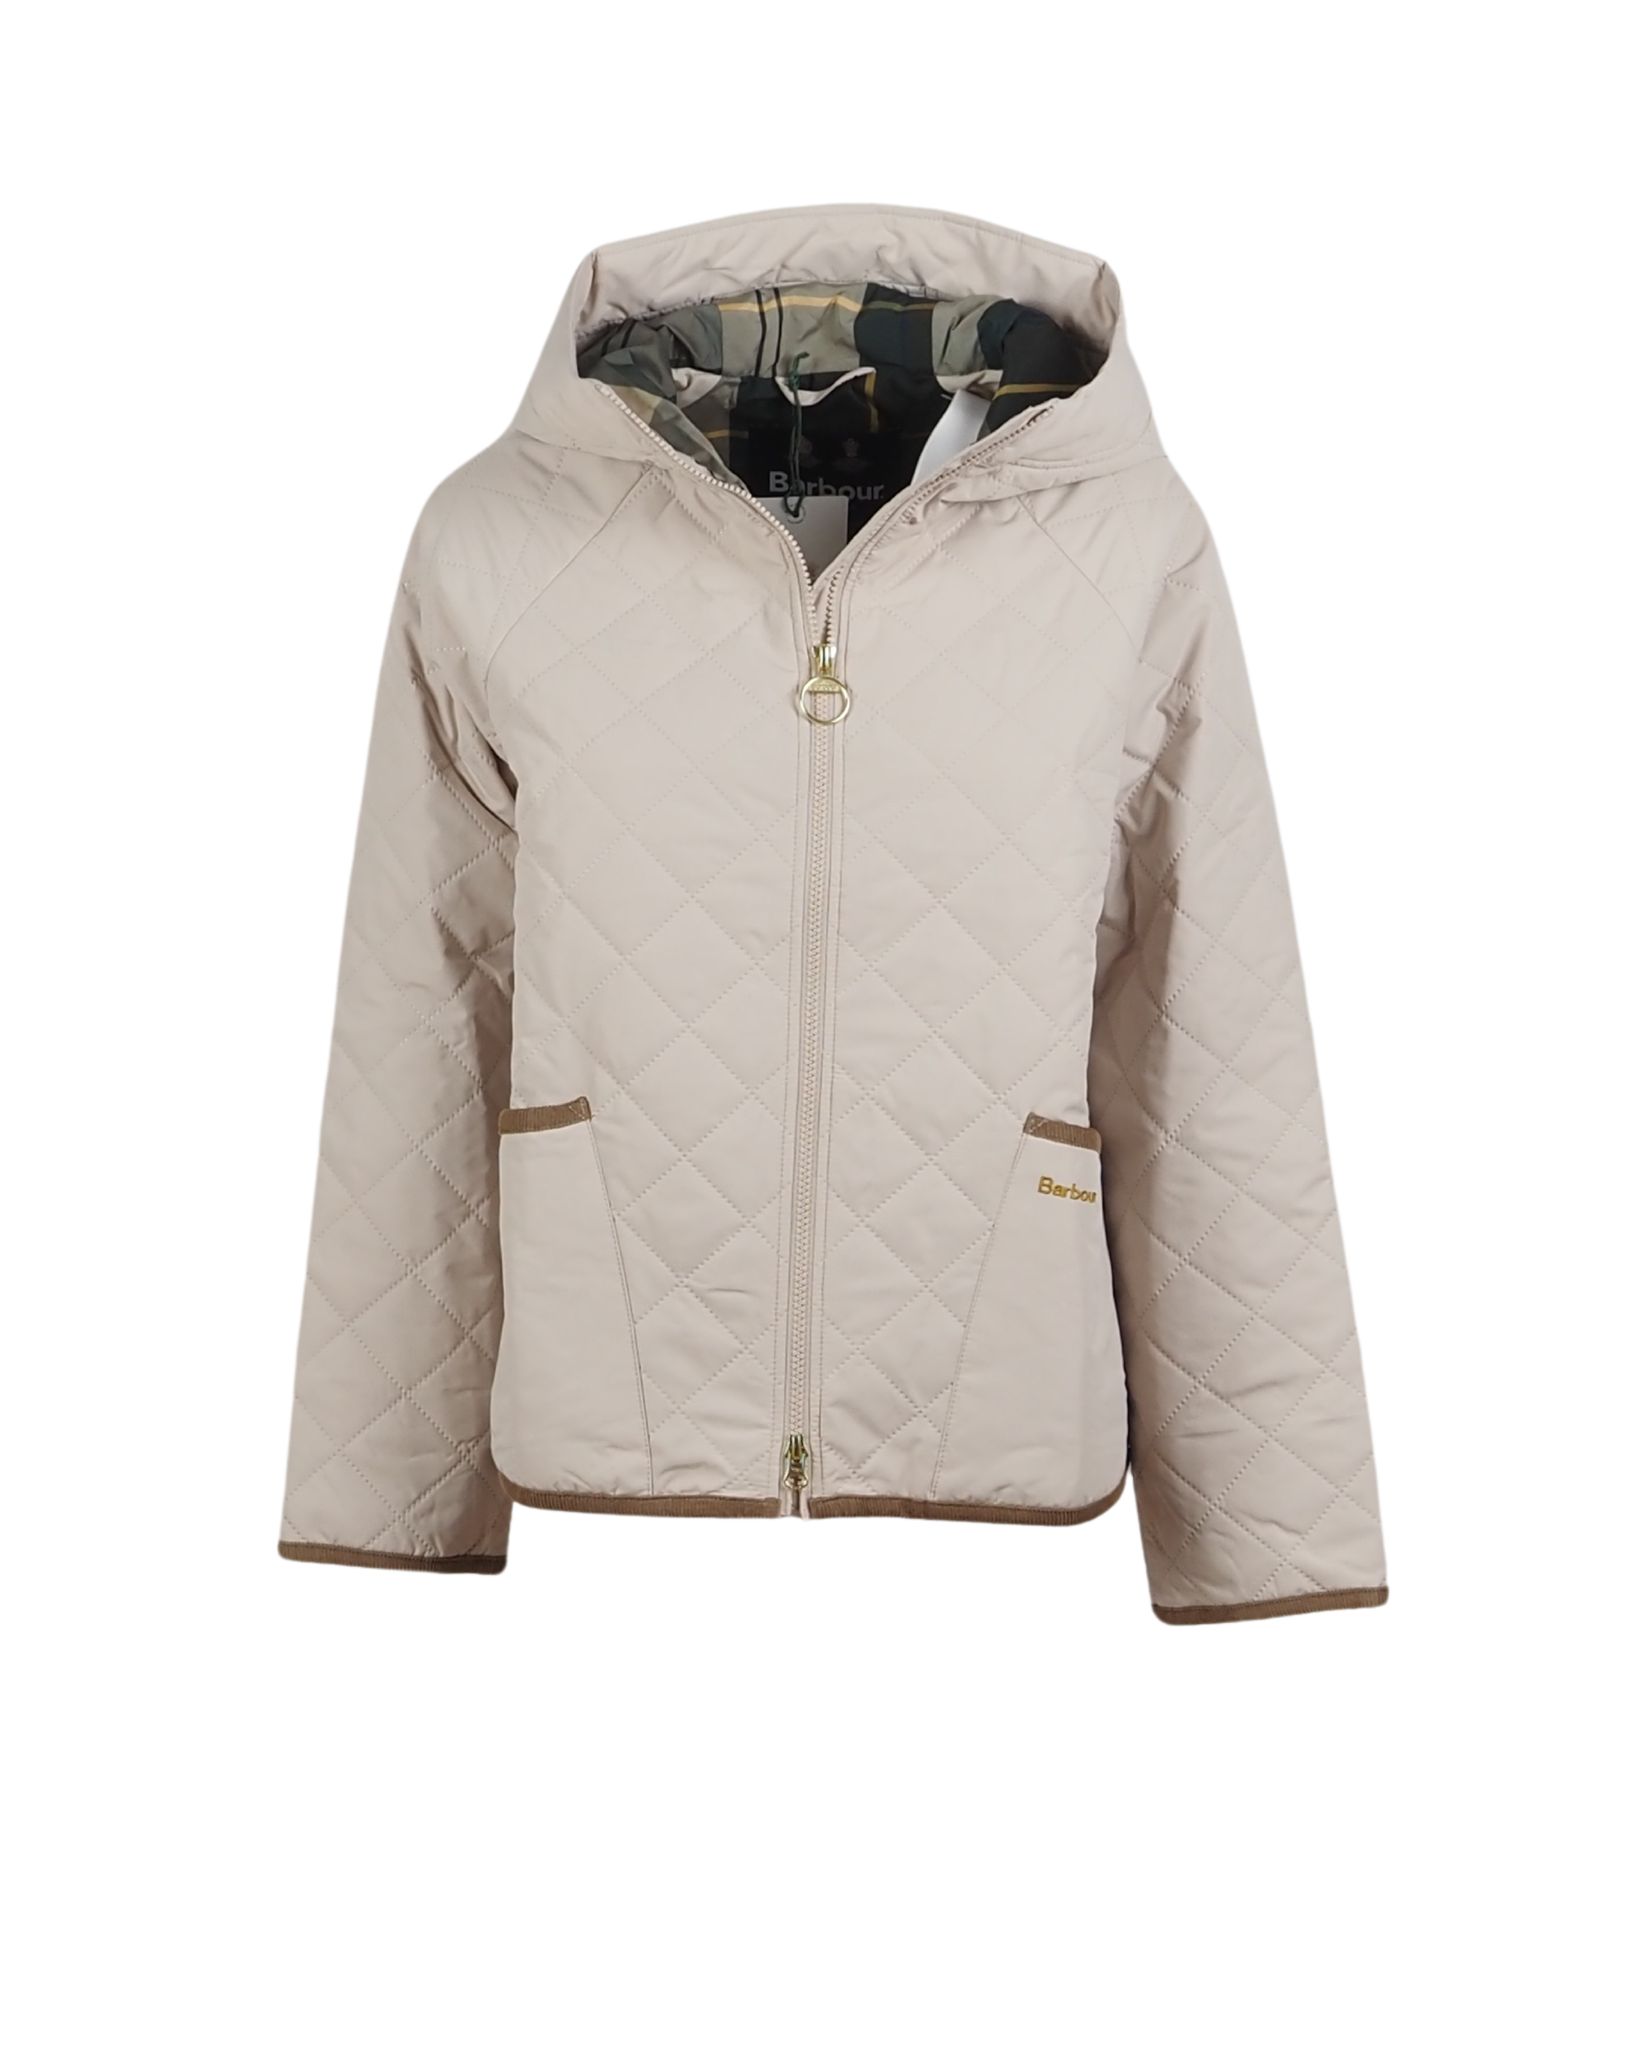 Barbour giacca trapuntata donna Glamis Beige